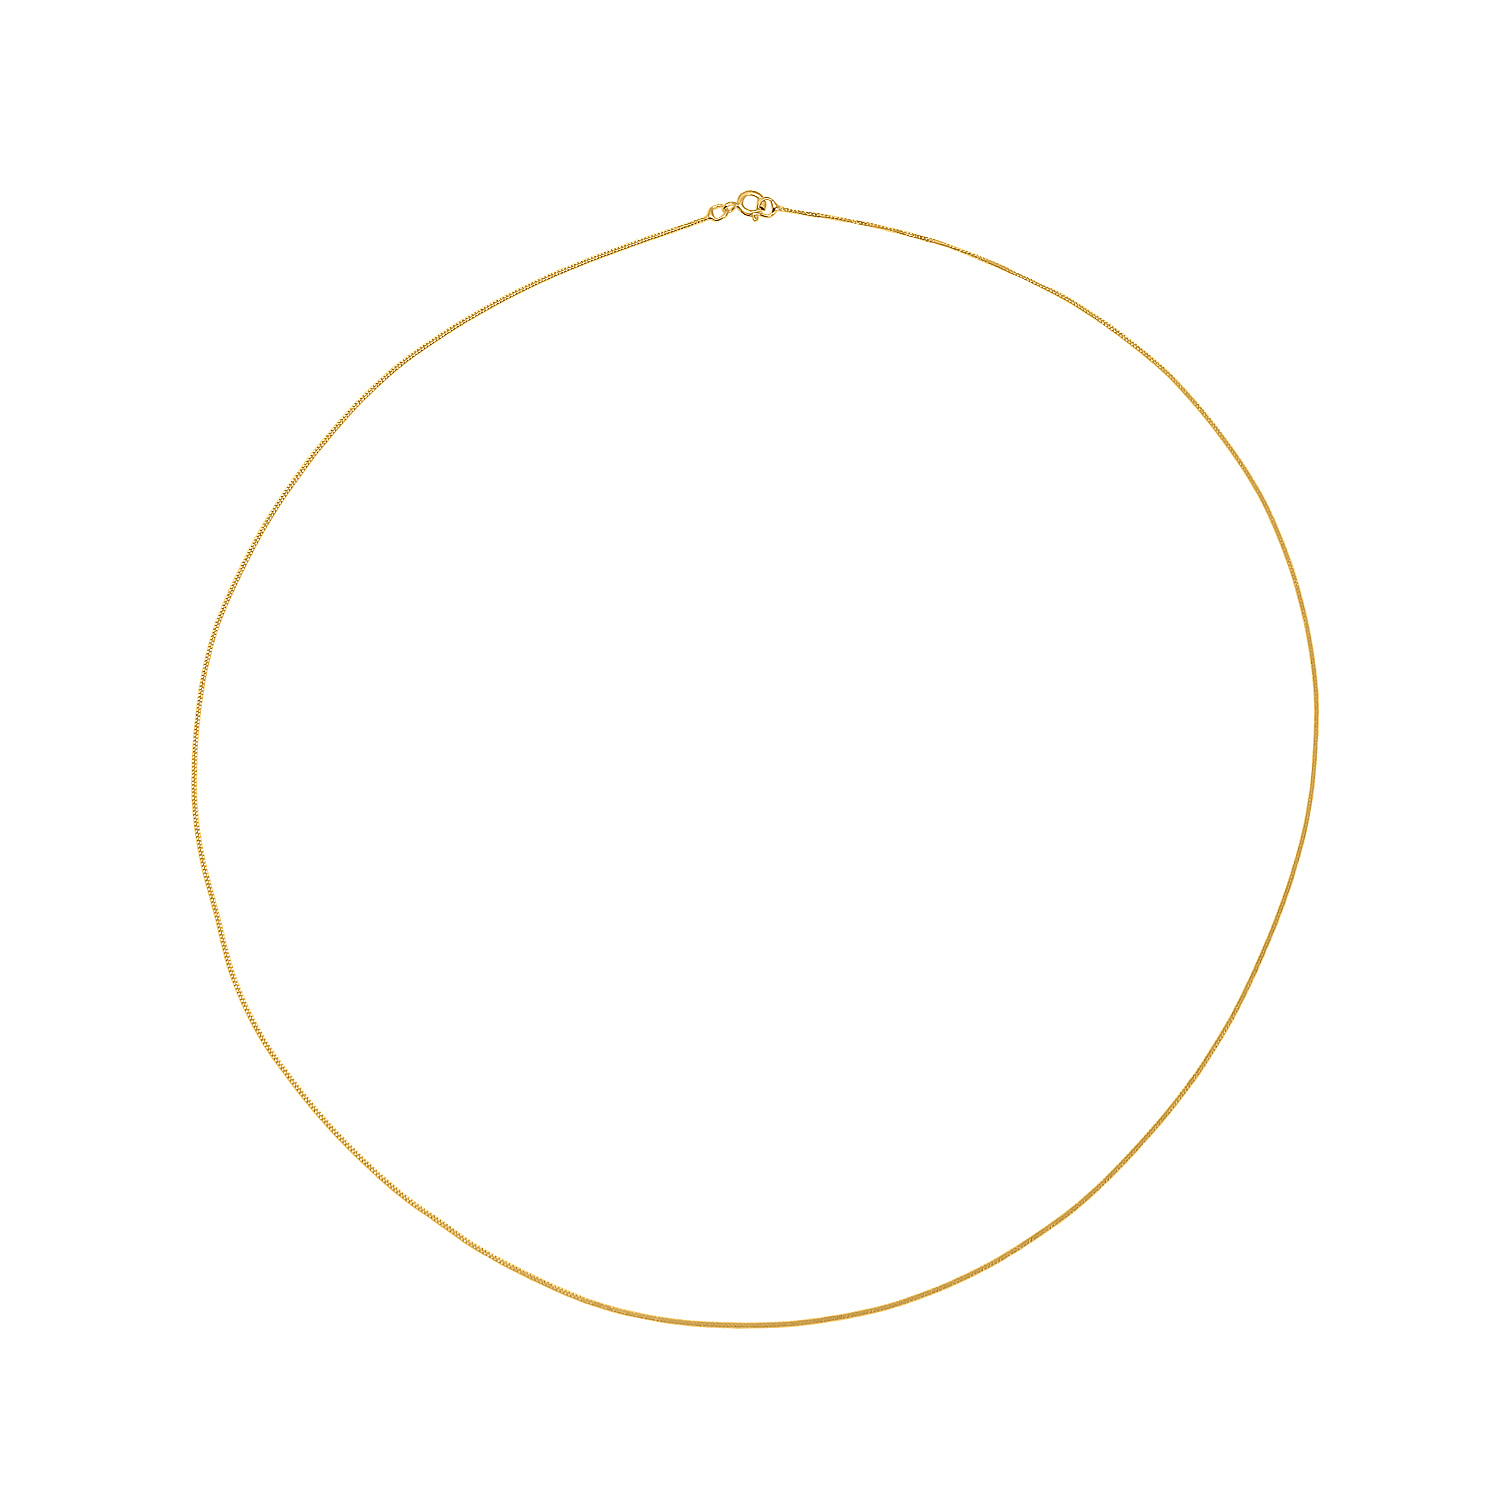 Hatton Garden Closeout - 9K Yellow Gold Curb Necklace (Size - 18)